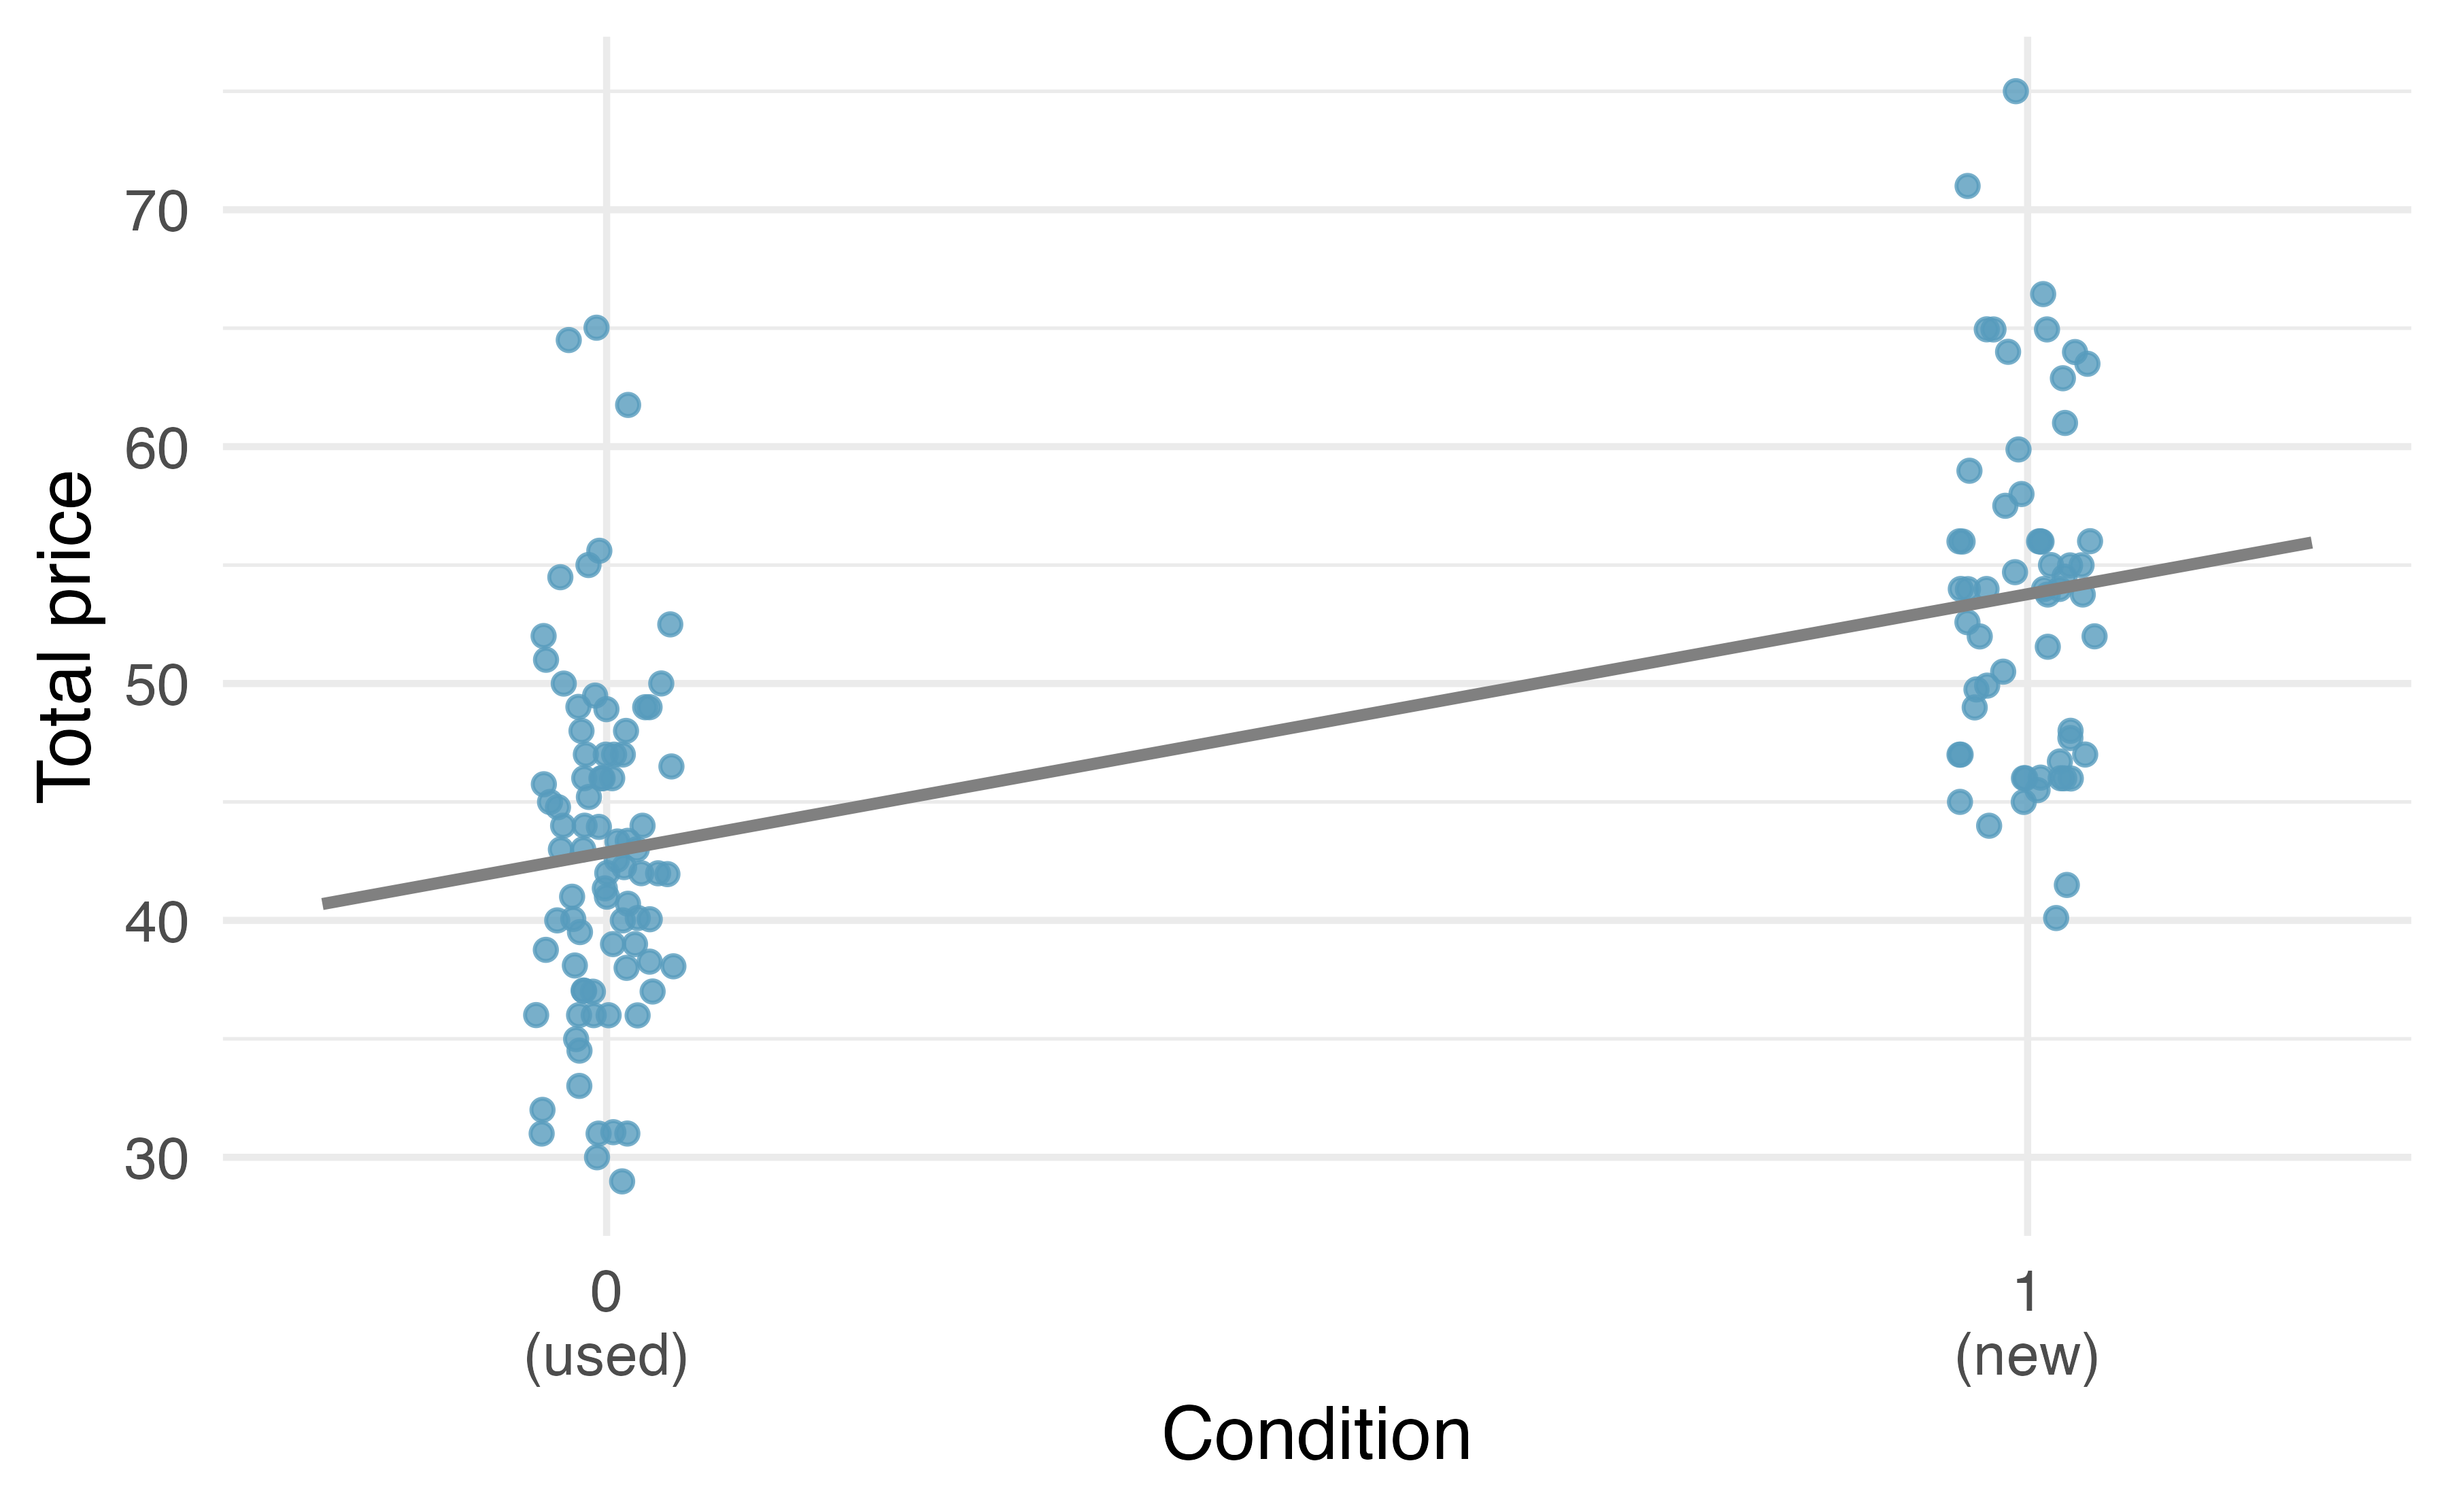 Scatterplot of Mario Kart data with condion (used or new) on the x-axis and total price on the y-axis.  Despite the x-axis being categorical, a least squares line is fit to the data with the value of used set to 0 and the value of new set to 1.